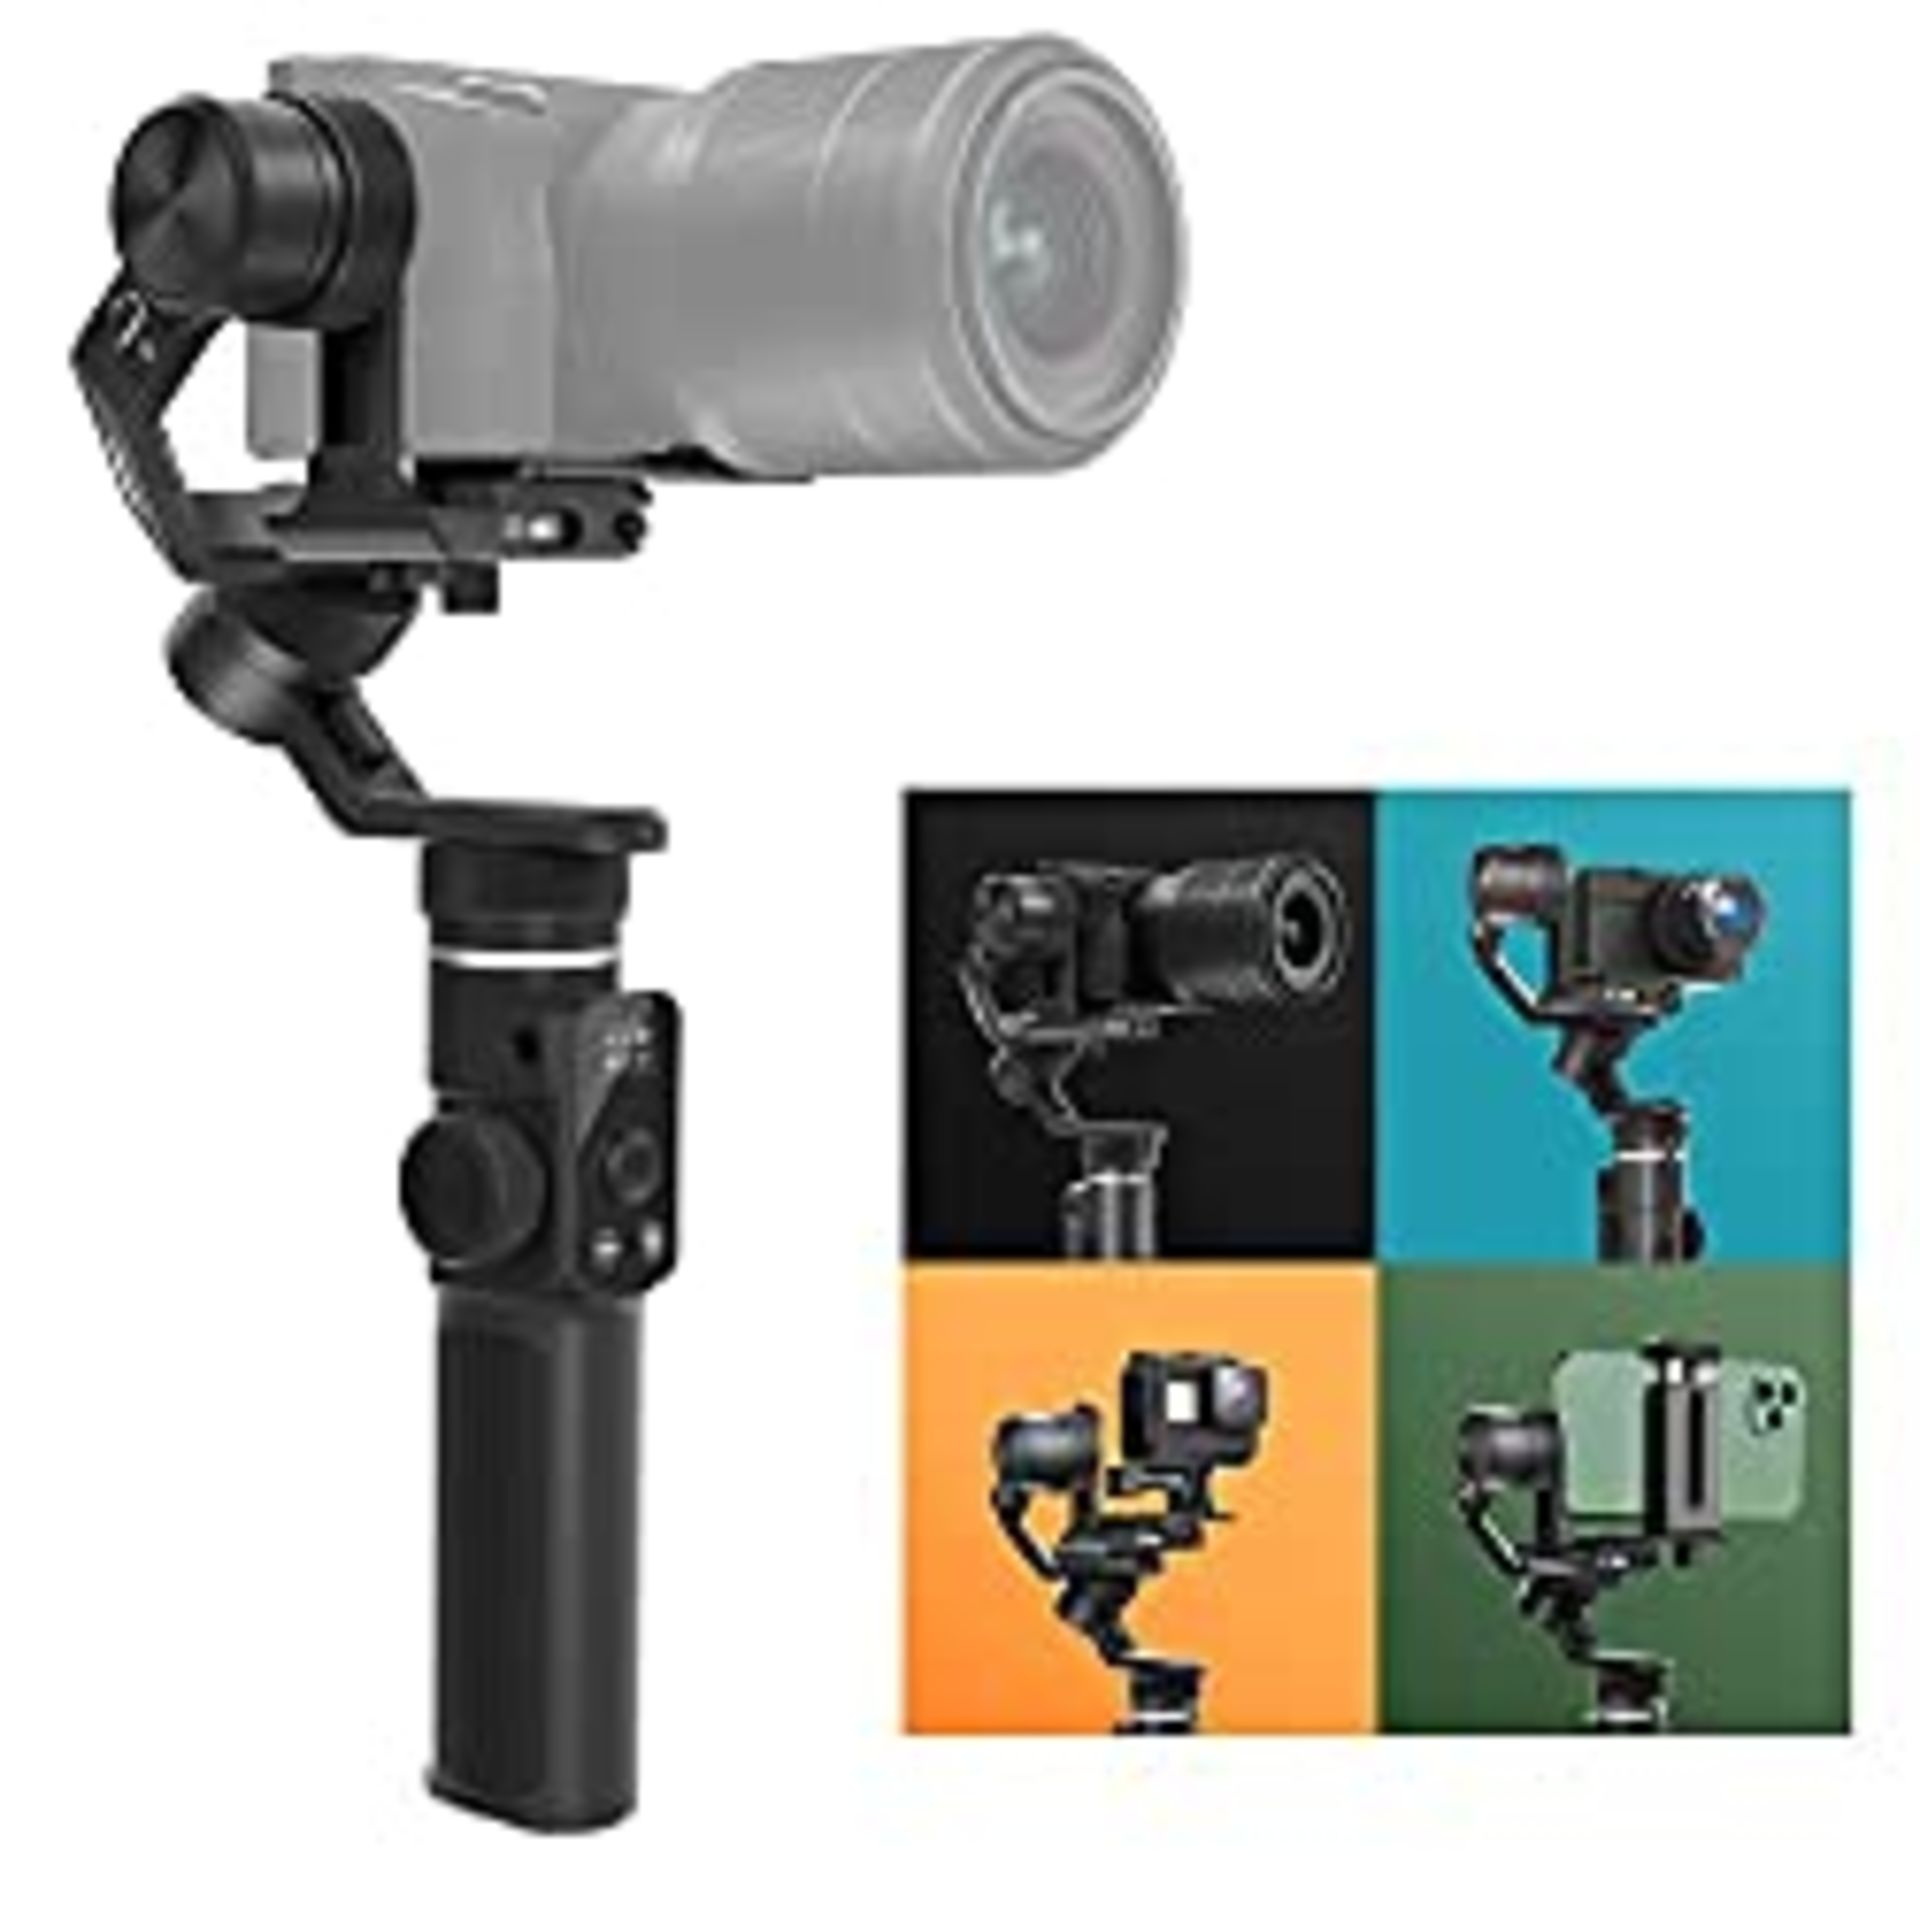 RRP £99.00 FeiyuTech G6MAX Gimbal Stabilizer For Camera